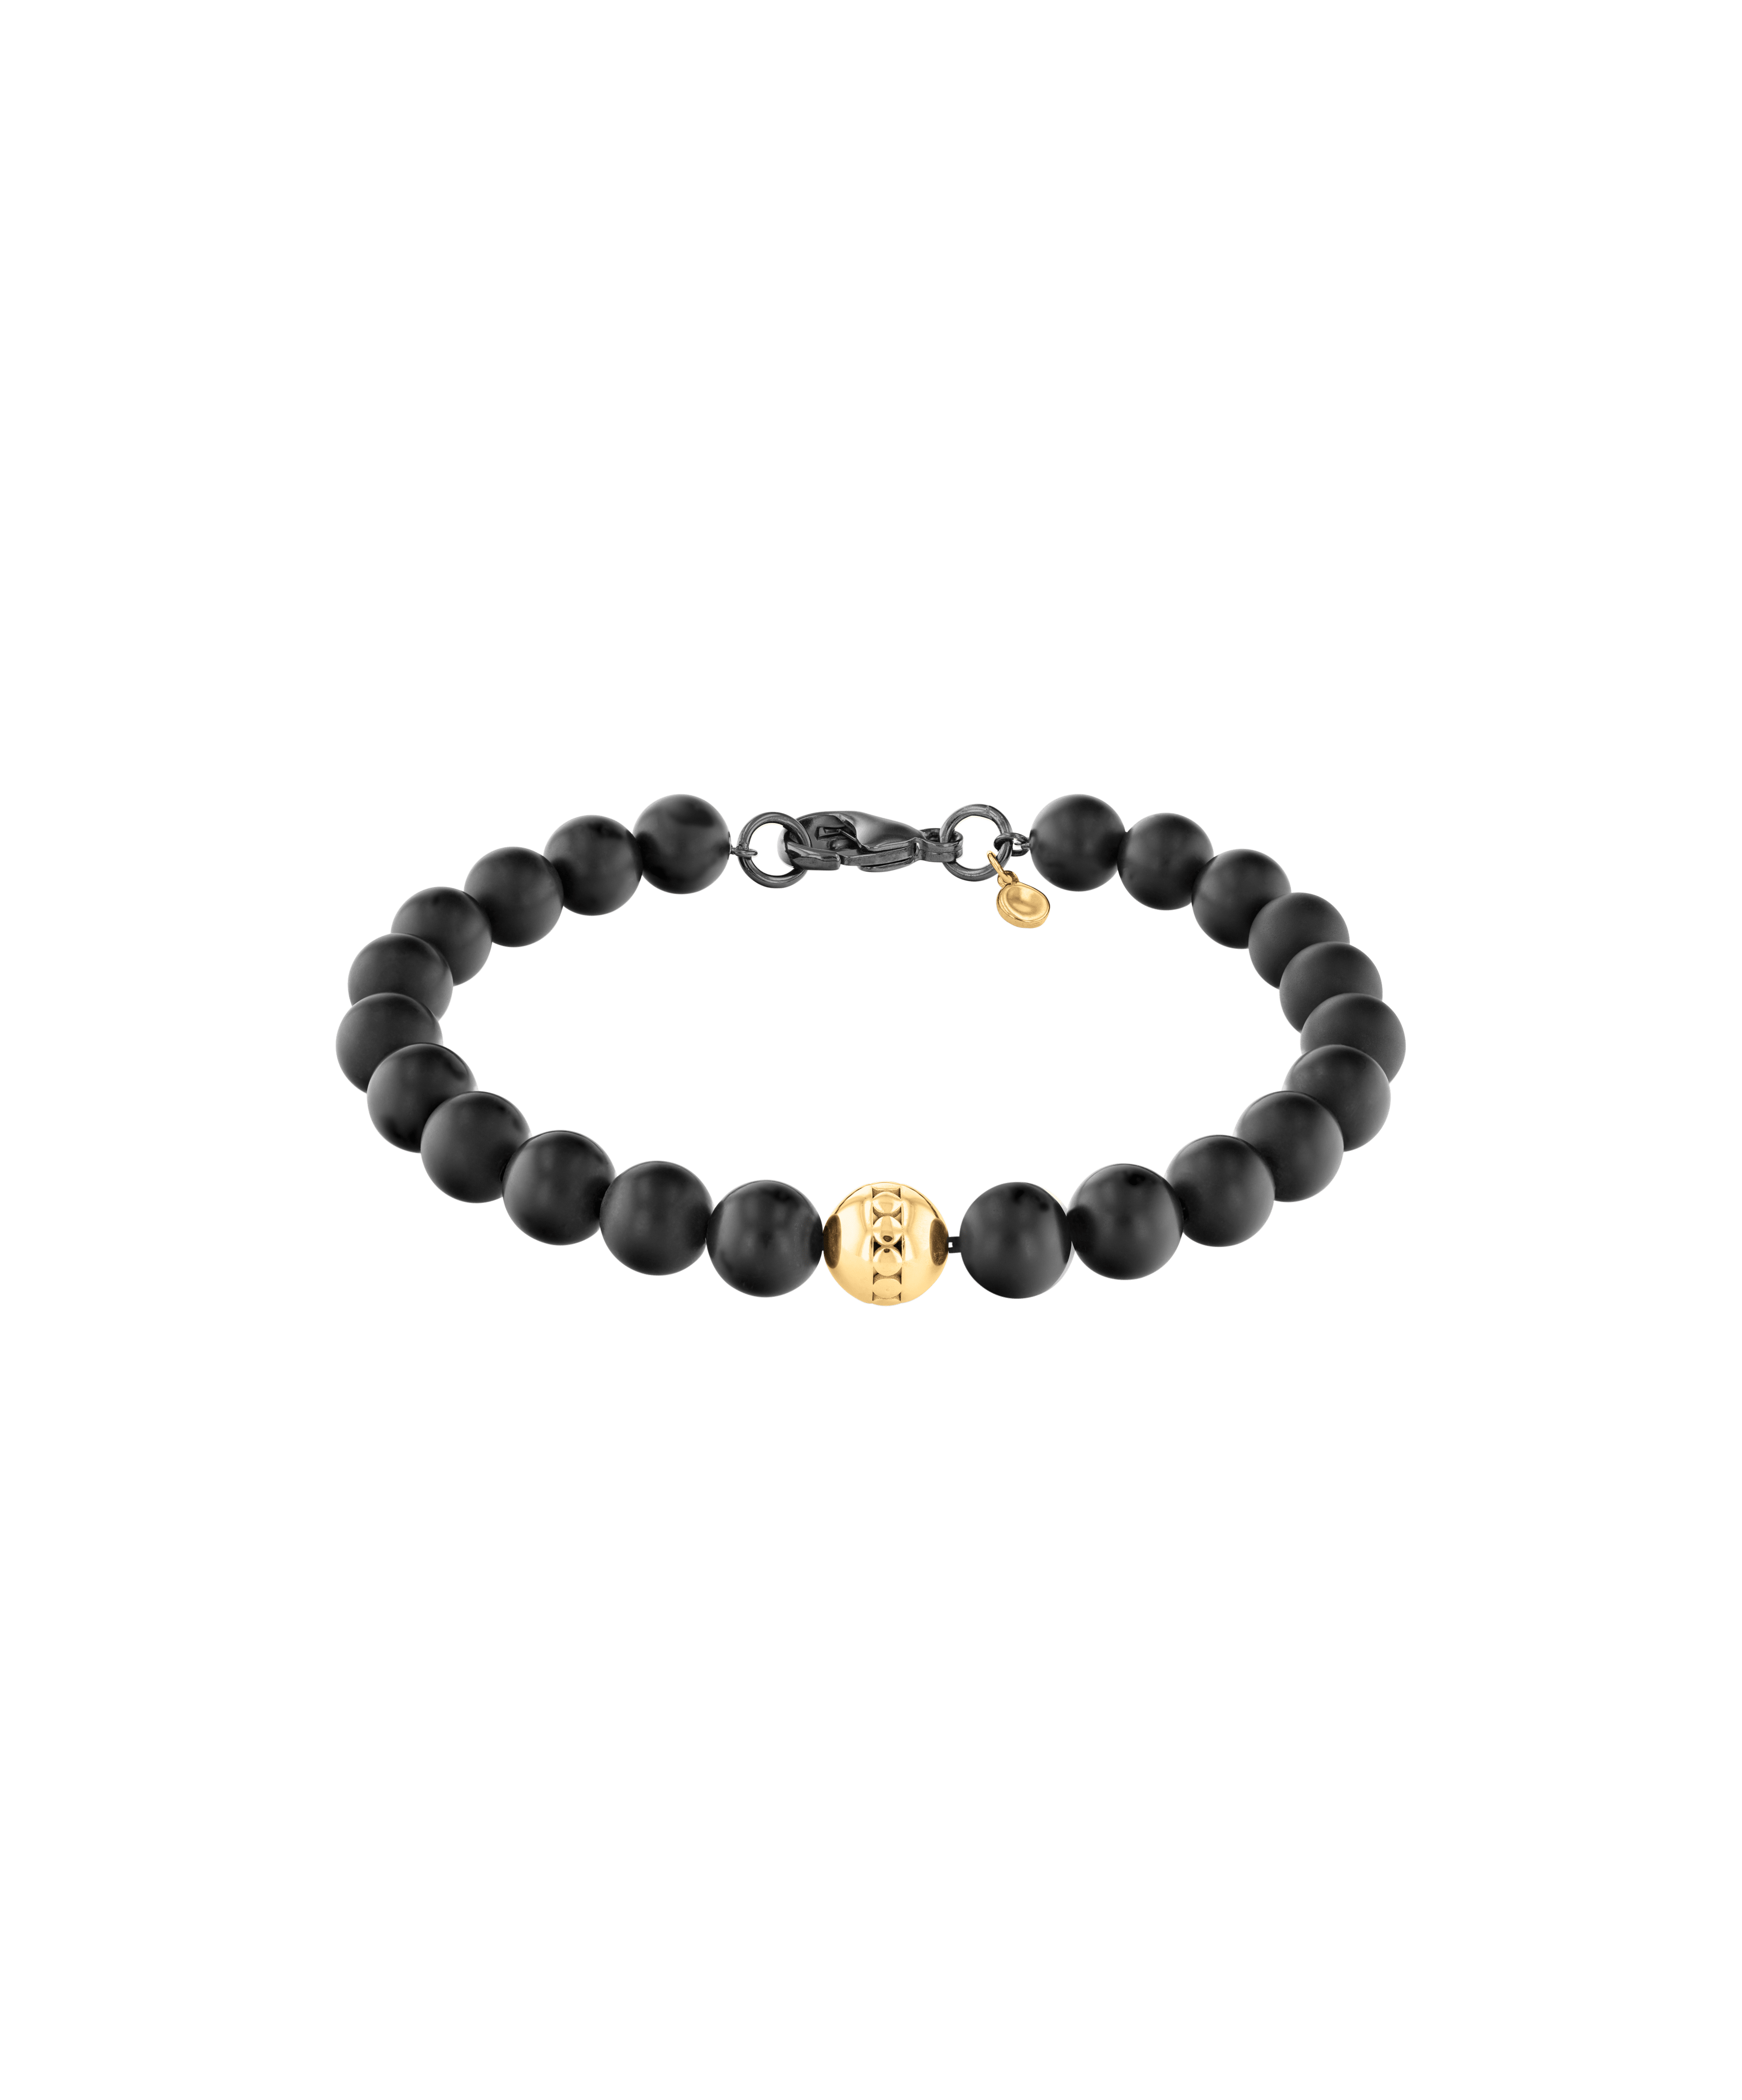 Onyx Bracelet, Small 3mm with Sterling Silver or Gold Filled Clasp – Kathy  Bankston